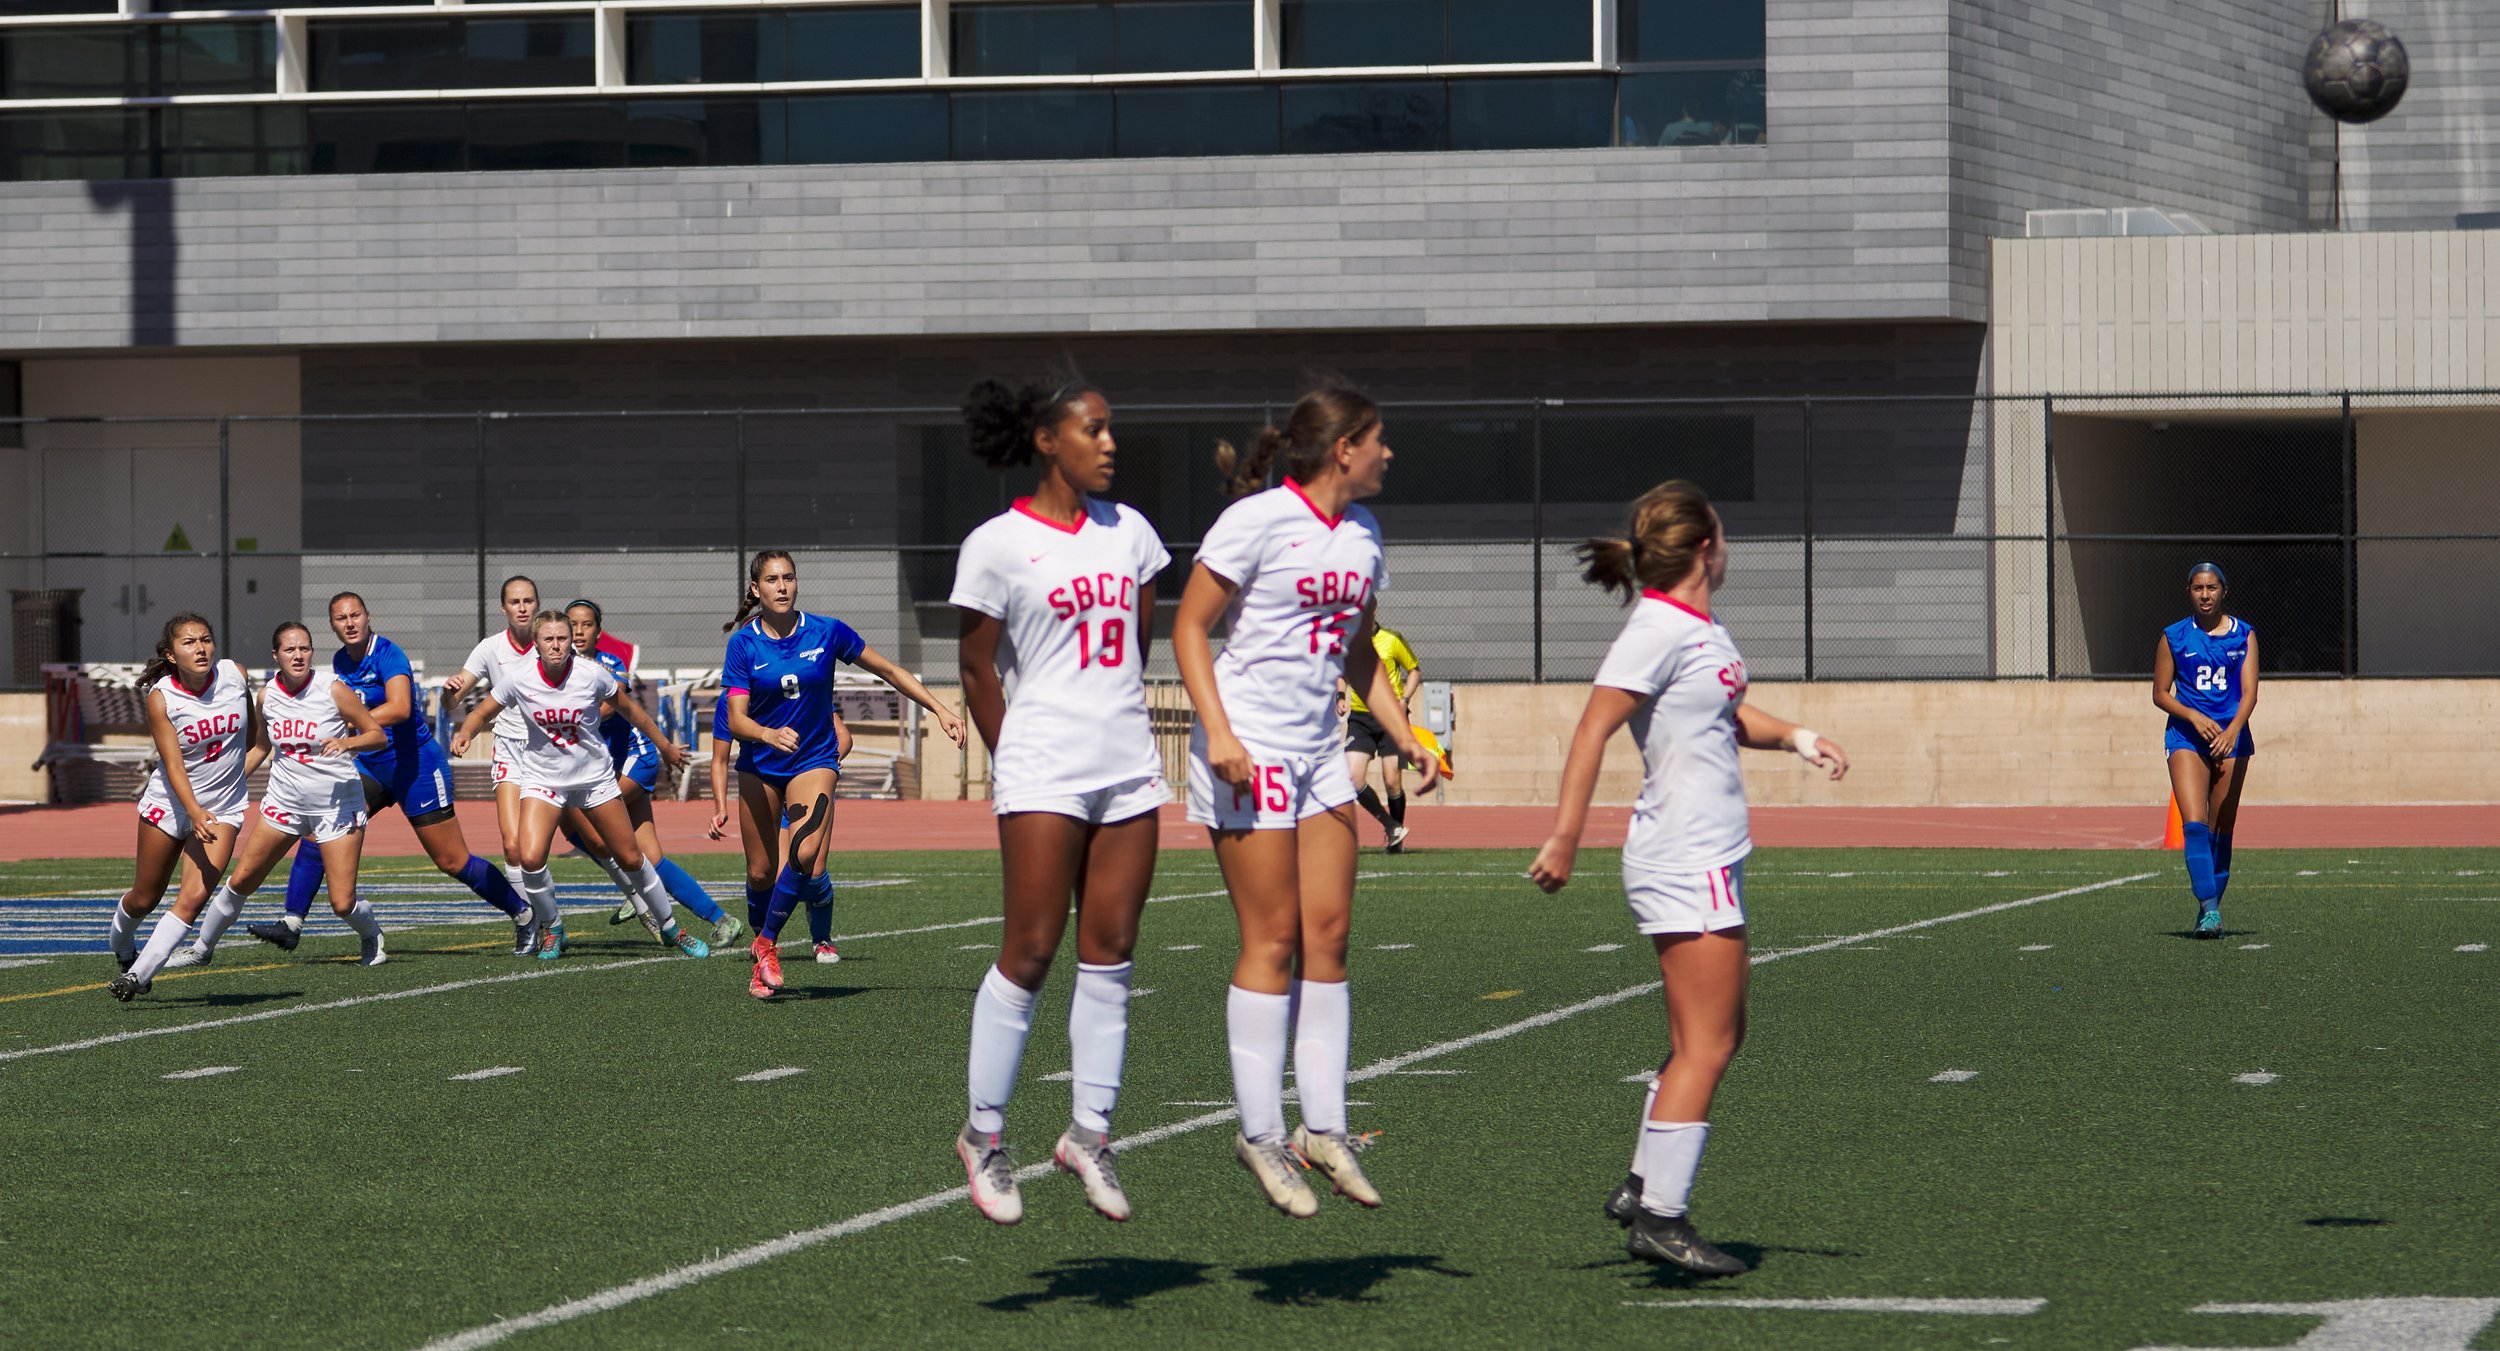  A view of the women's soccer game between the Santa Monica College Corsairs and the Santa Barbara City College Vaqueros on Tuesday, Sept. 20, 2022, at Corsair Field in Santa Monica, Calif. The game ended in a 1-1 tie. (Nicholas McCall | The Corsair)